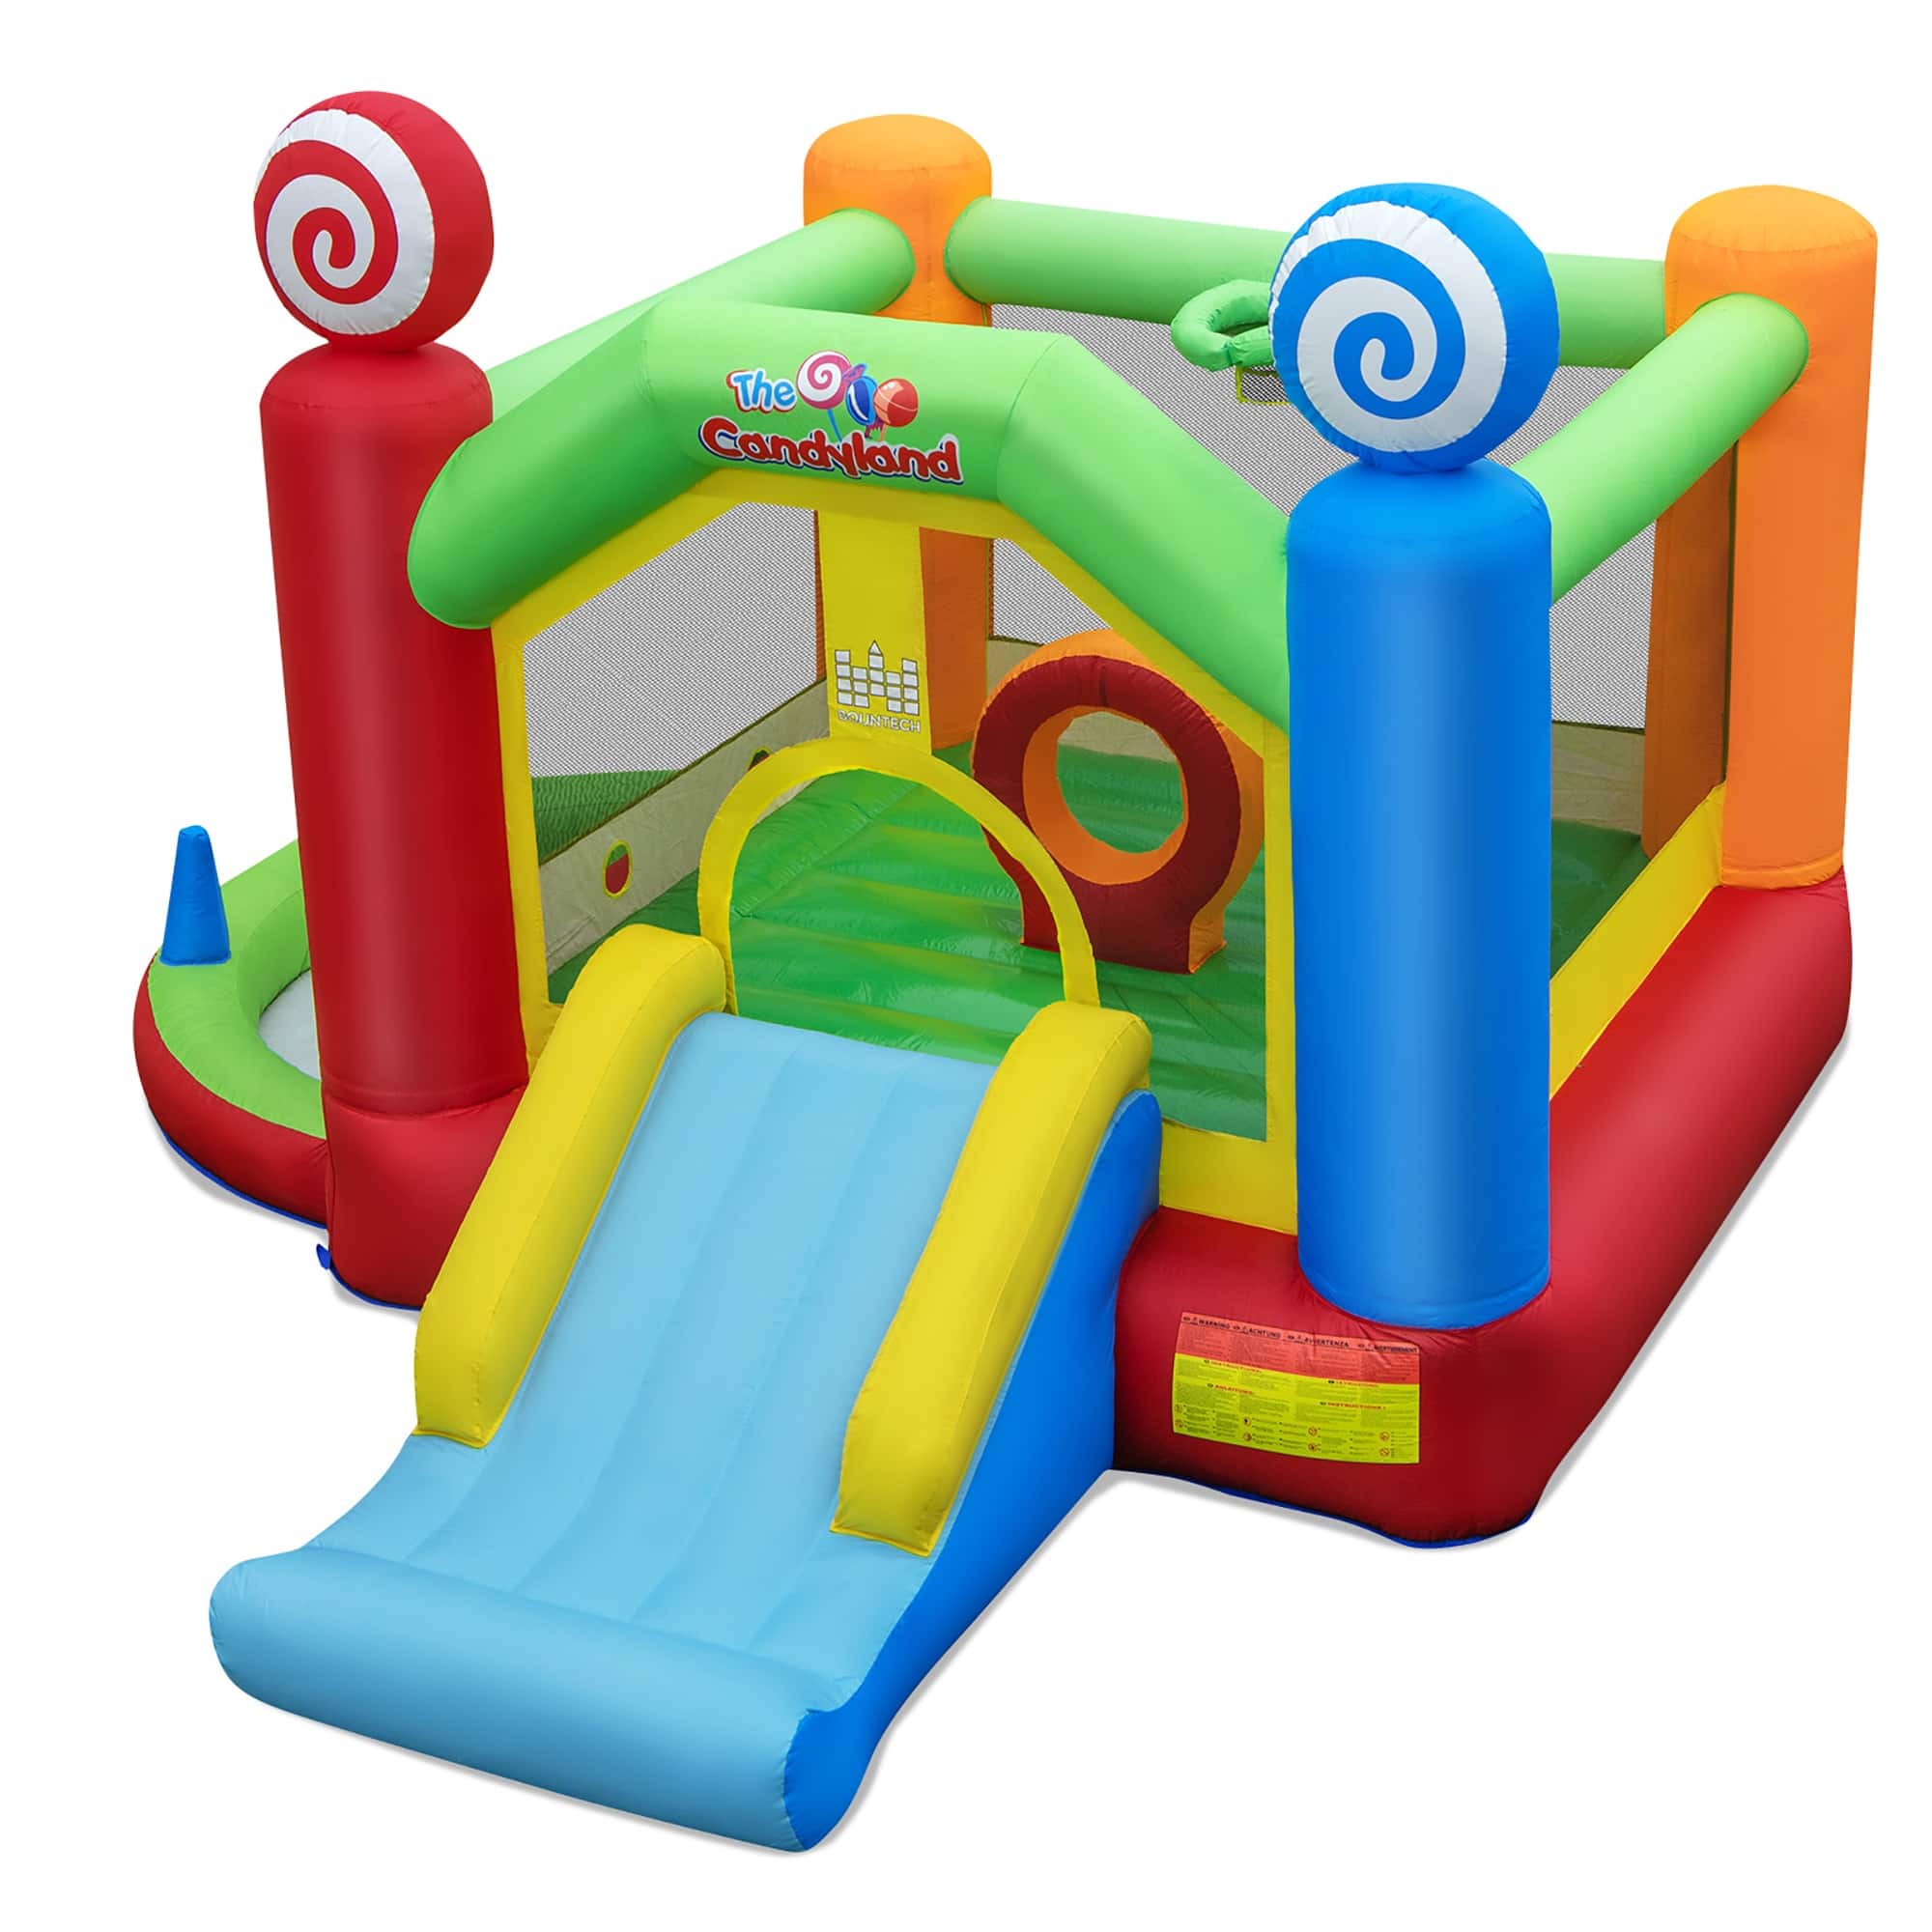 Costway Candy Land Theme Kids Inflatable Bounce Castle with 735W Air - 12.5ft x 11.5ft x 8ft (L x W x H)